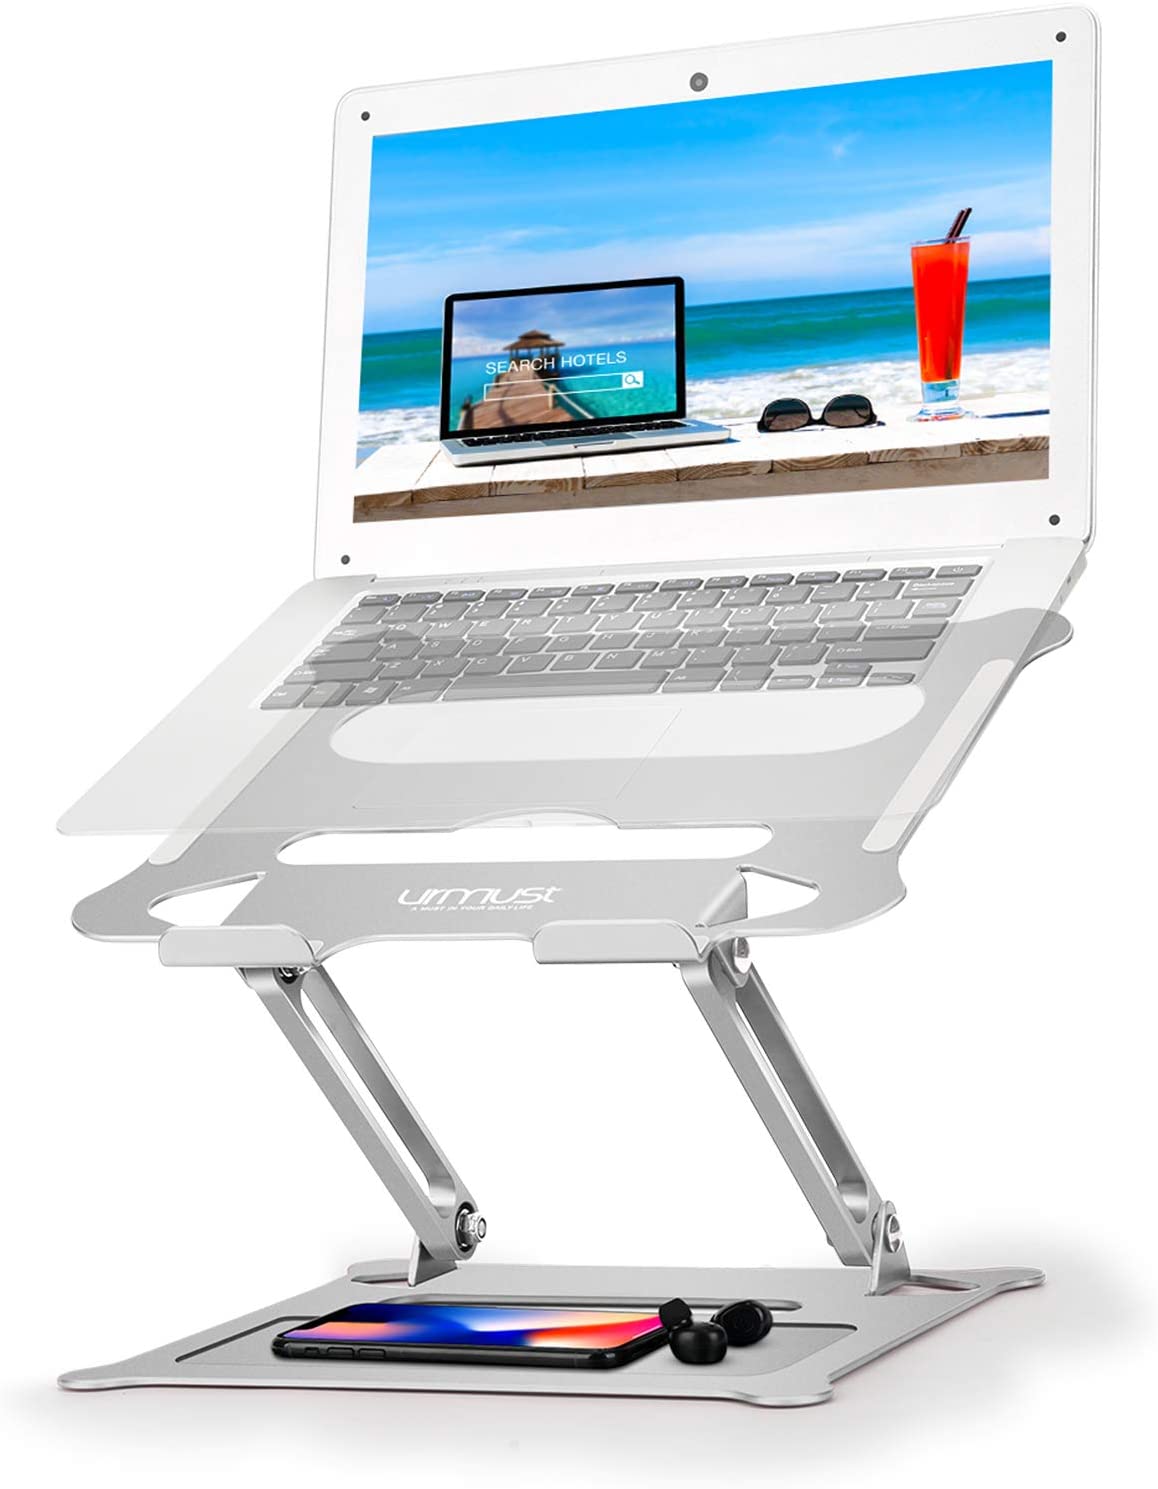 Portable Laptop Riser or laptop stand